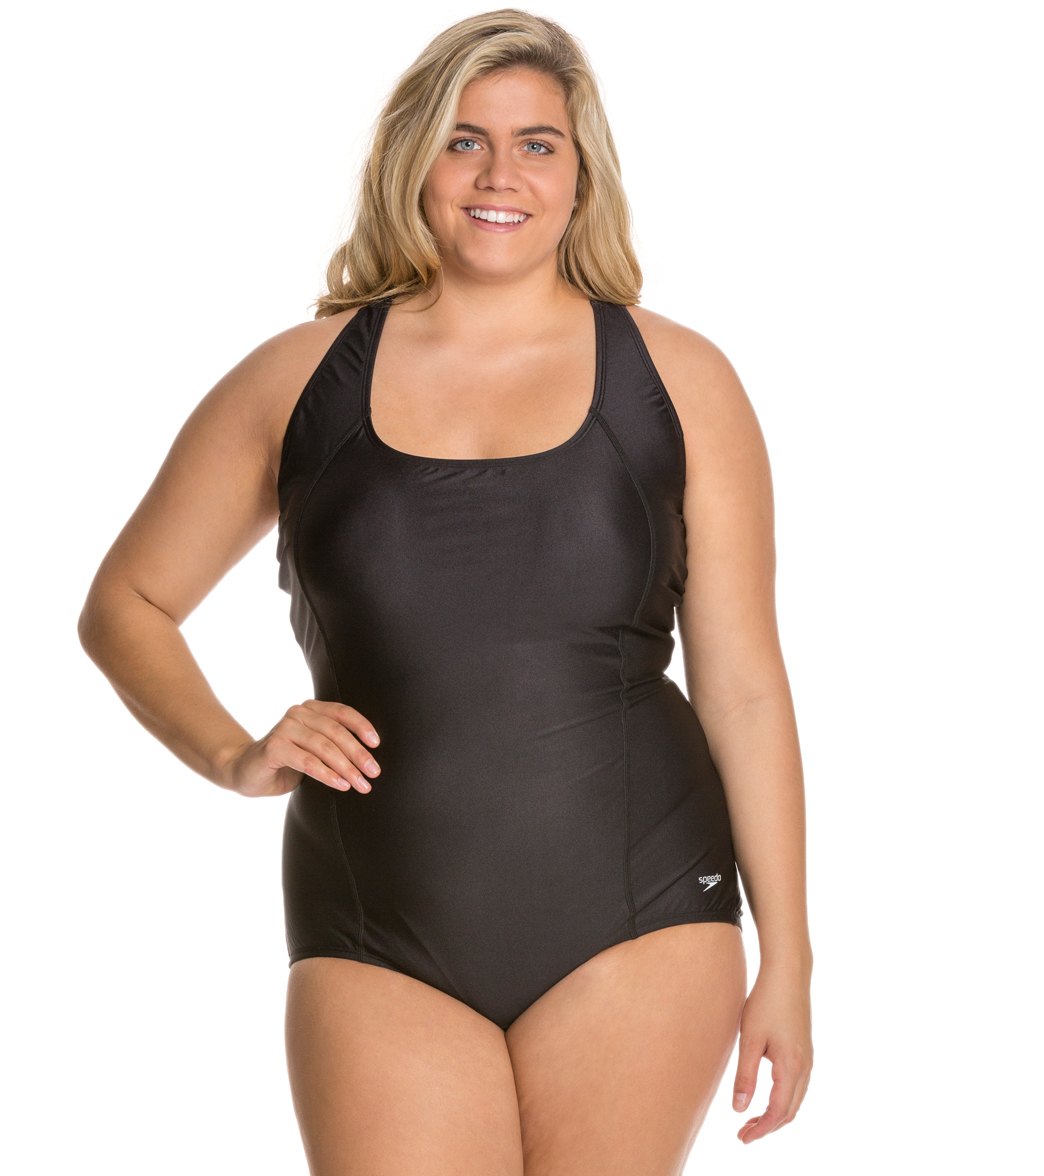 Speedo Conservative Ultraback Plus Size Chlorine Resistant One Piece  Swimsuit at SwimOutlet.com